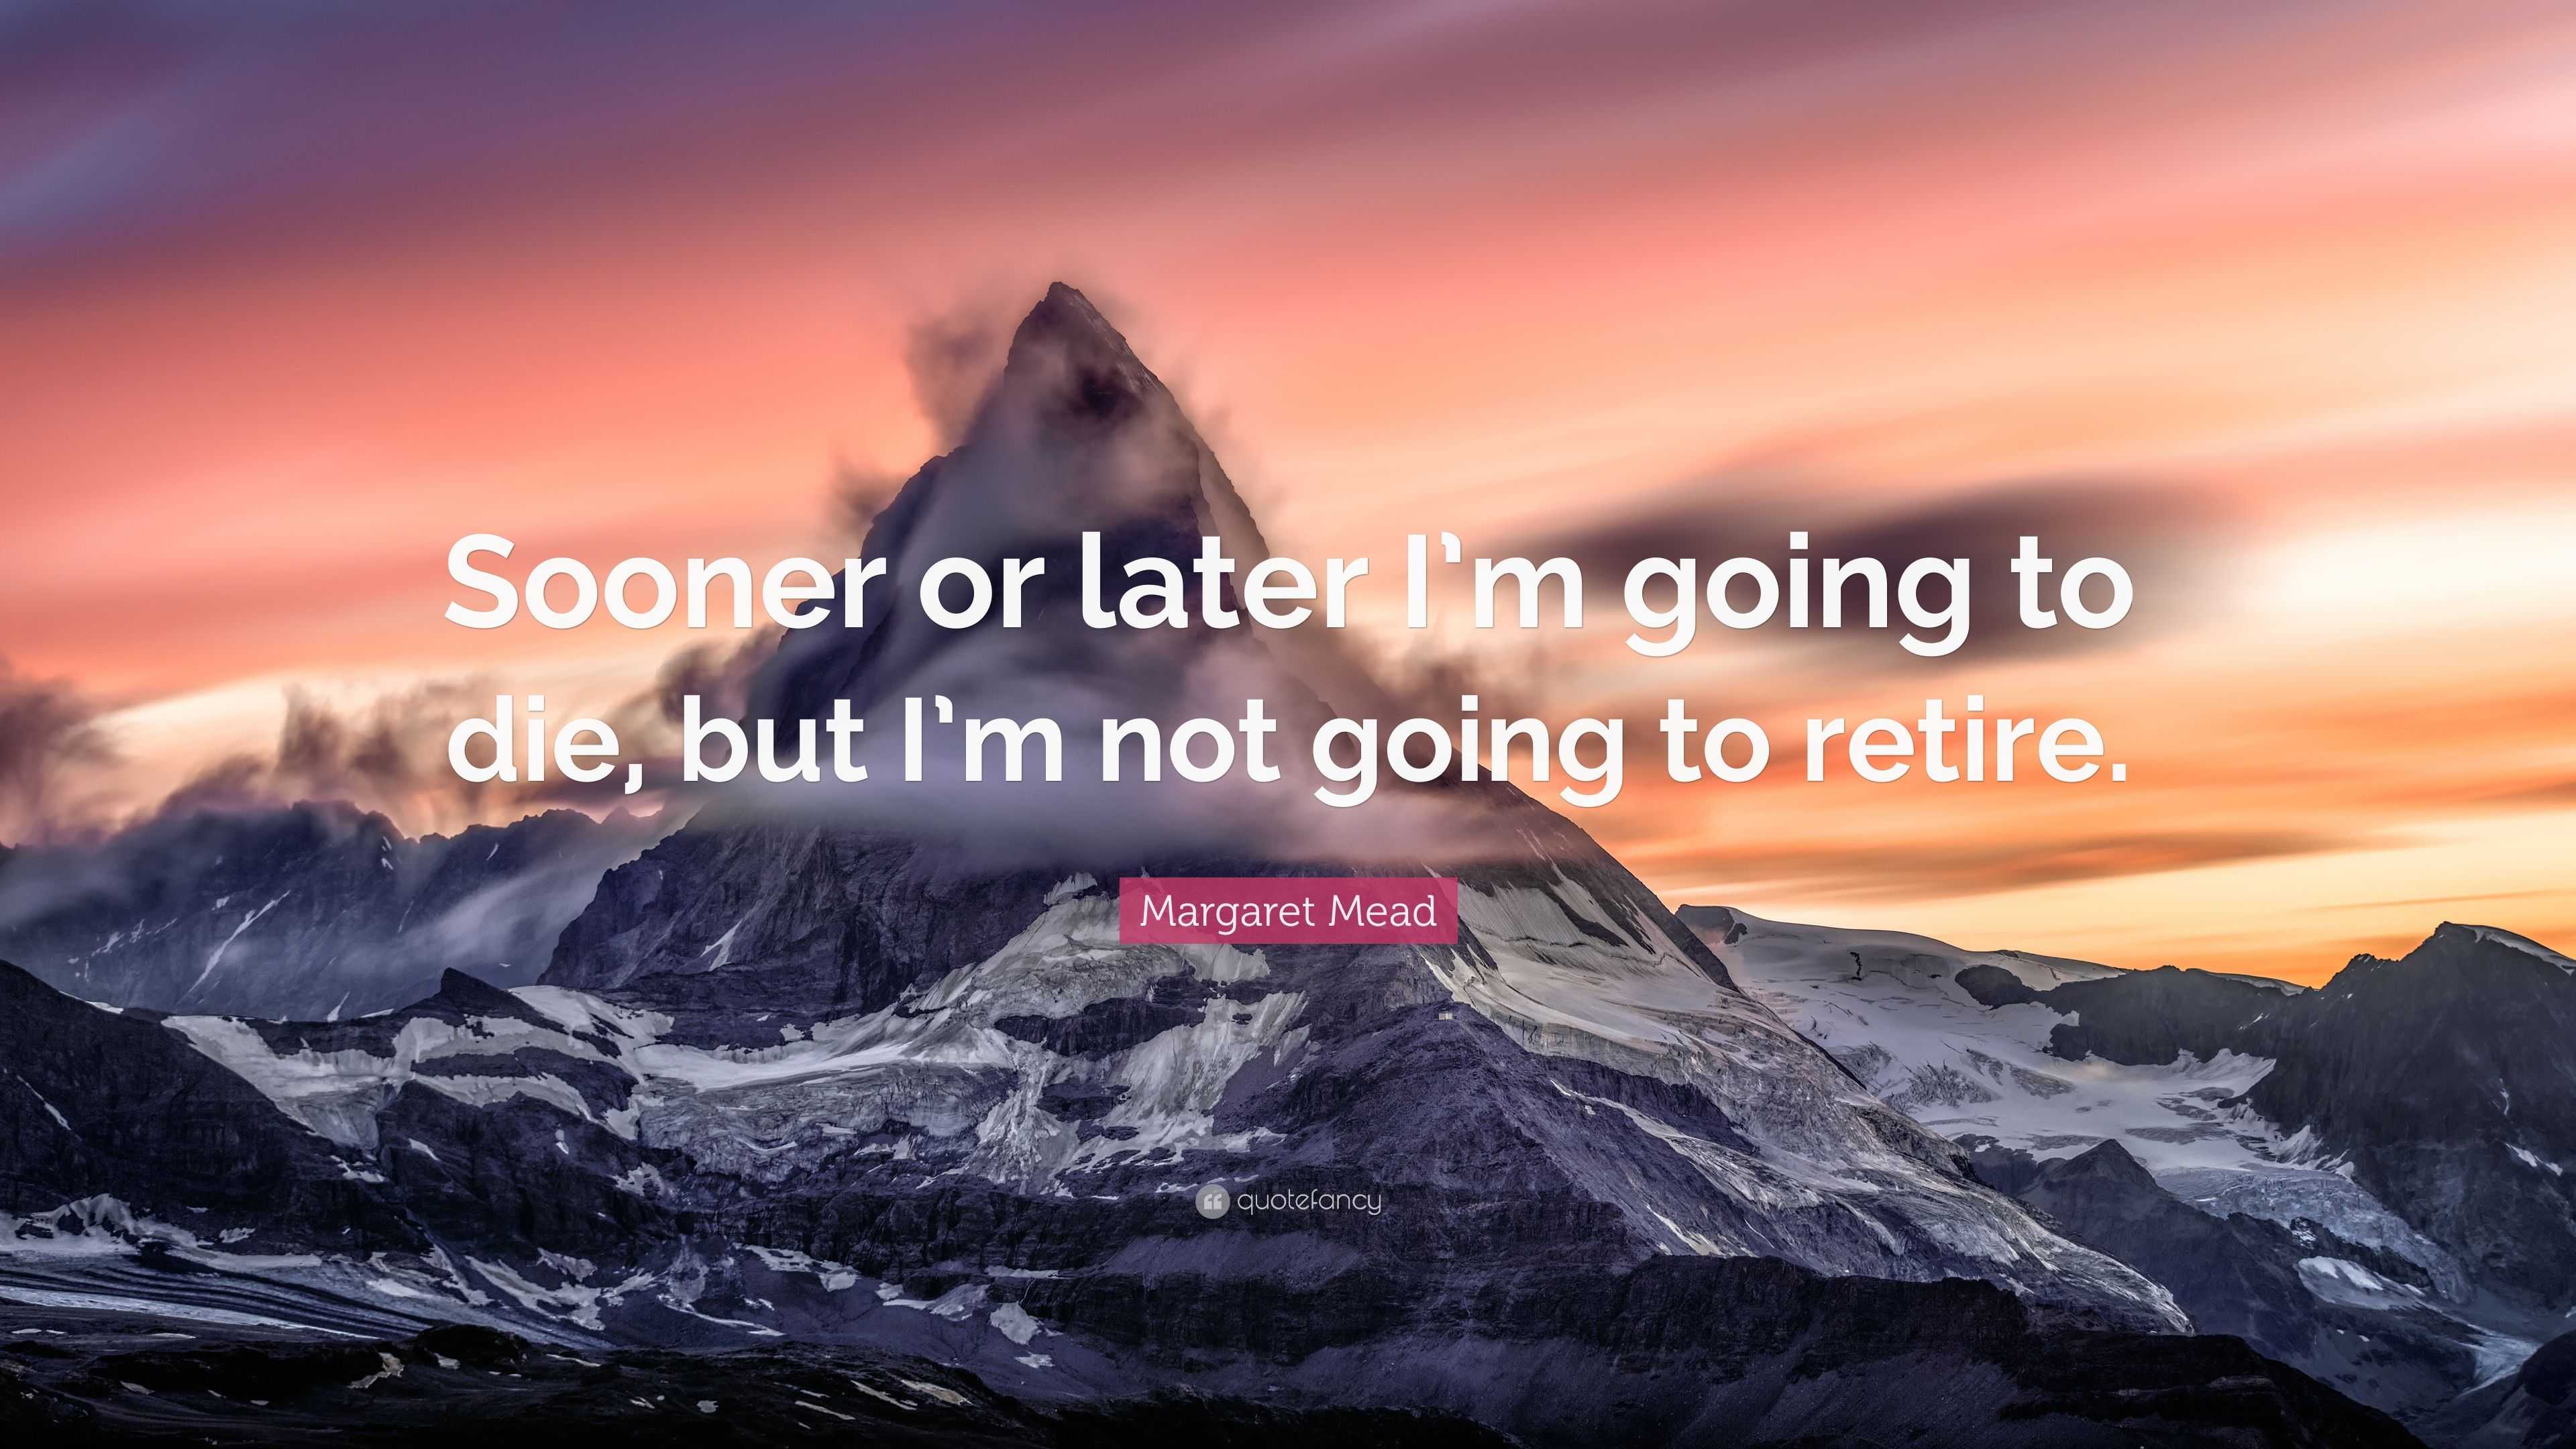 https://quotefancy.com/media/wallpaper/3840x2160/2308748-Margaret-Mead-Quote-Sooner-or-later-I-m-going-to-die-but-I-m-not.jpg